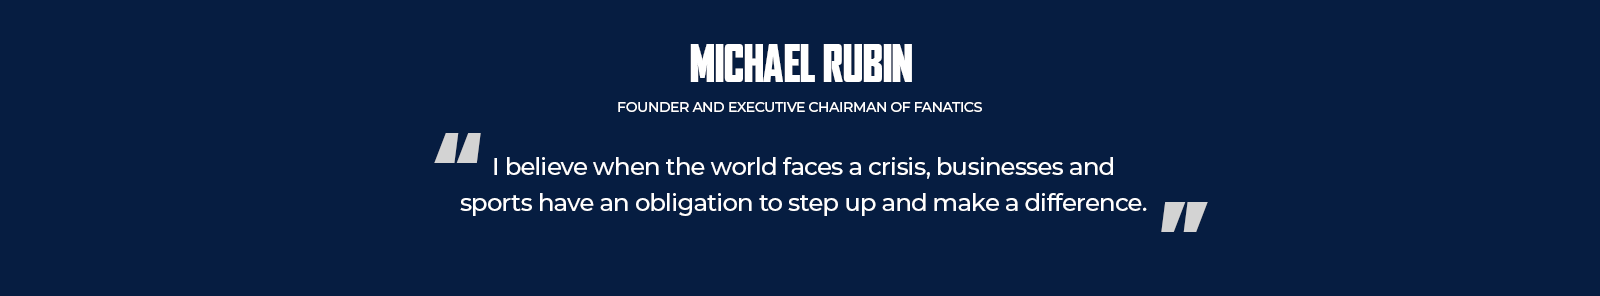 Michael Rubin is founder and executive chairman of fanatics. Quote from Michael Rubin "I believe when the world faces a crisis, businesses and sports have an obligation to step up and make a difference."